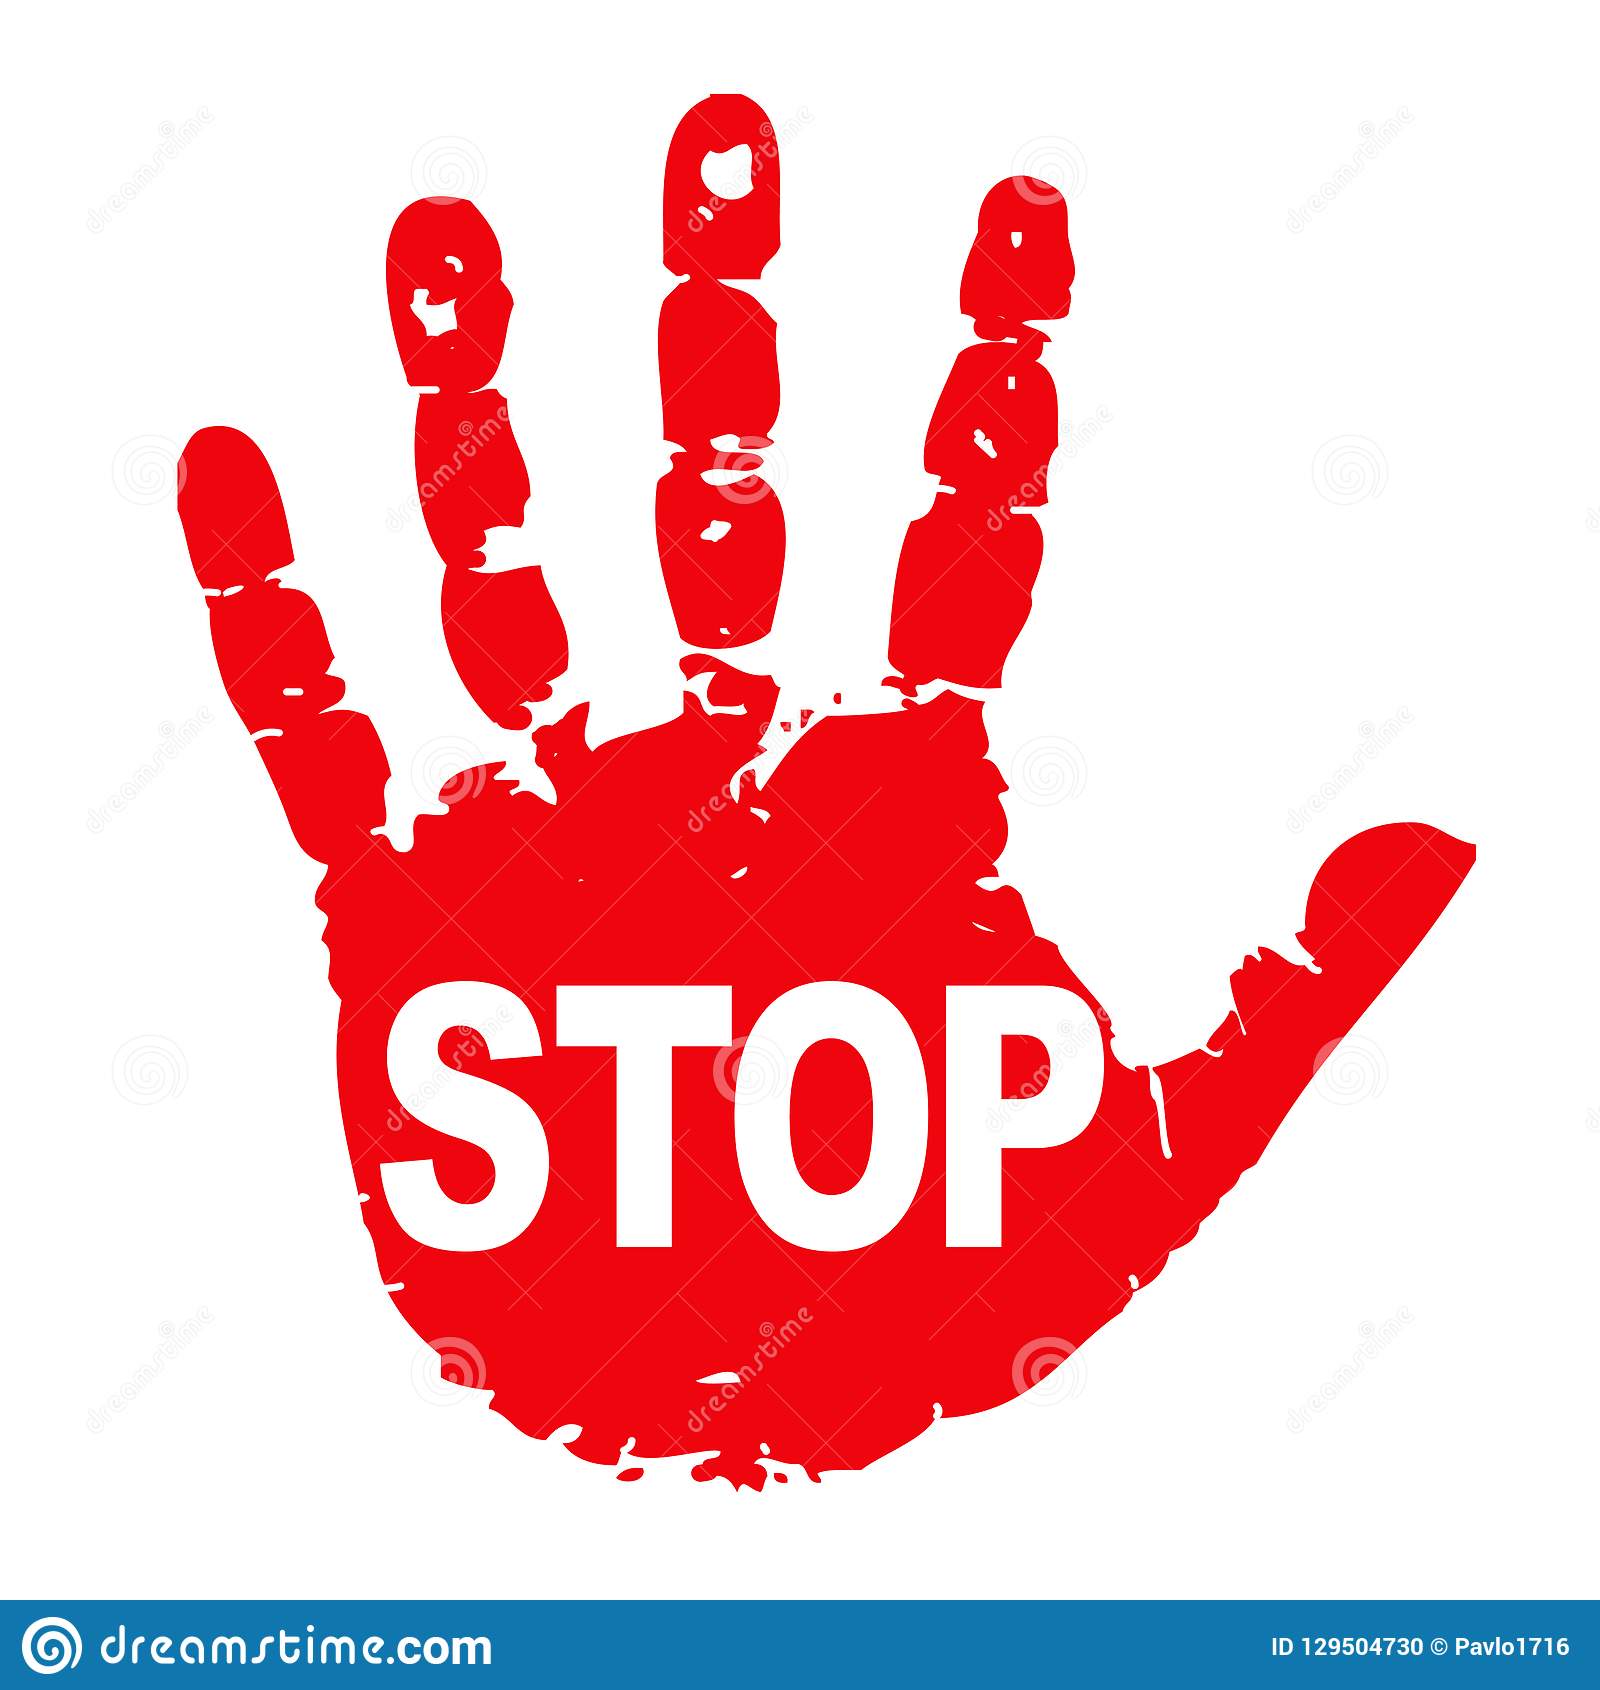 stop-sign-icon-hand-stock-vector-129504730.jpg